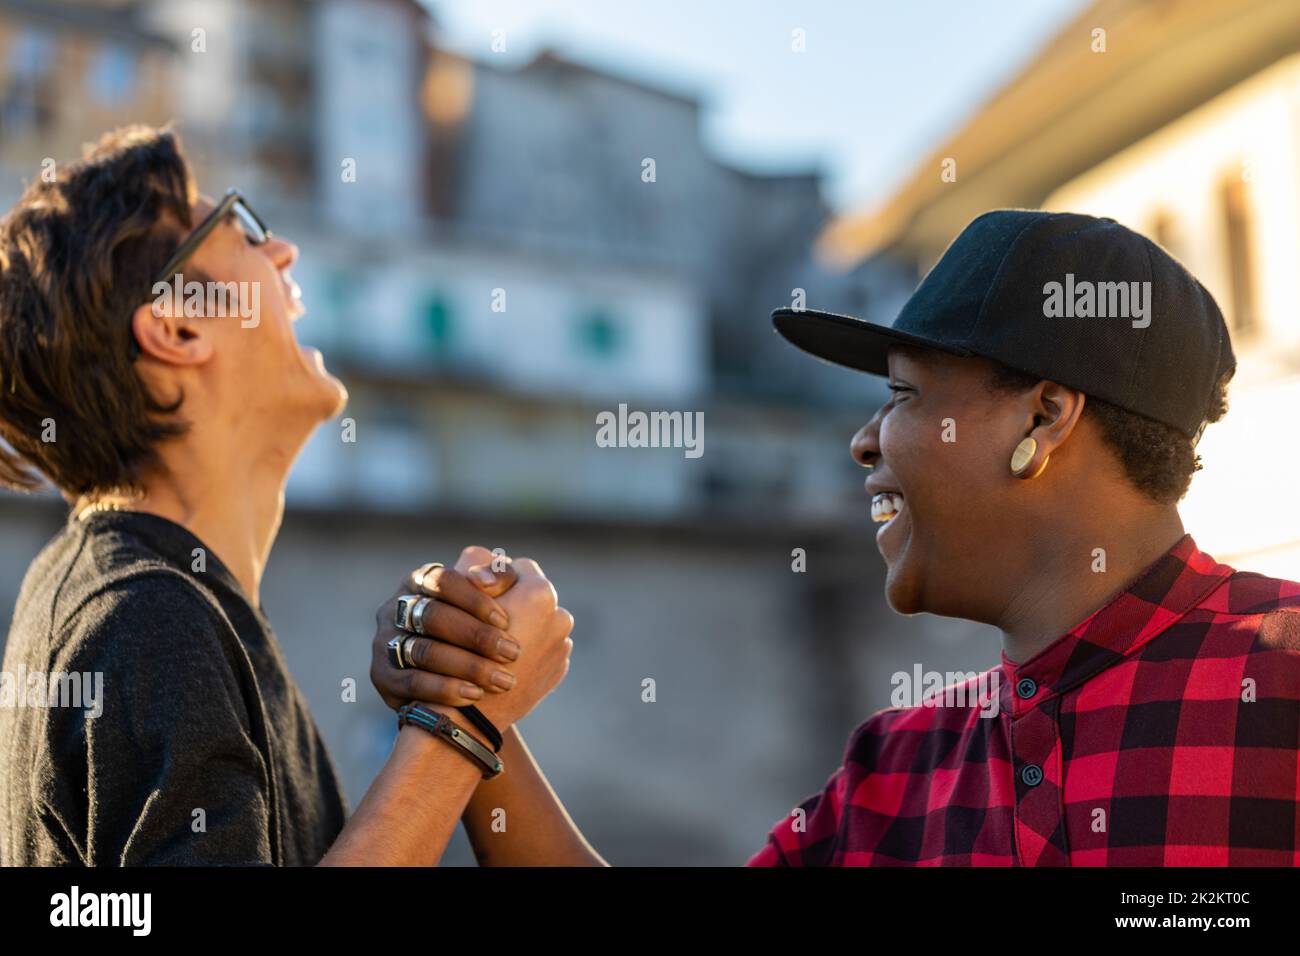 Two young men sharing a good joke laughing together Stock Photo